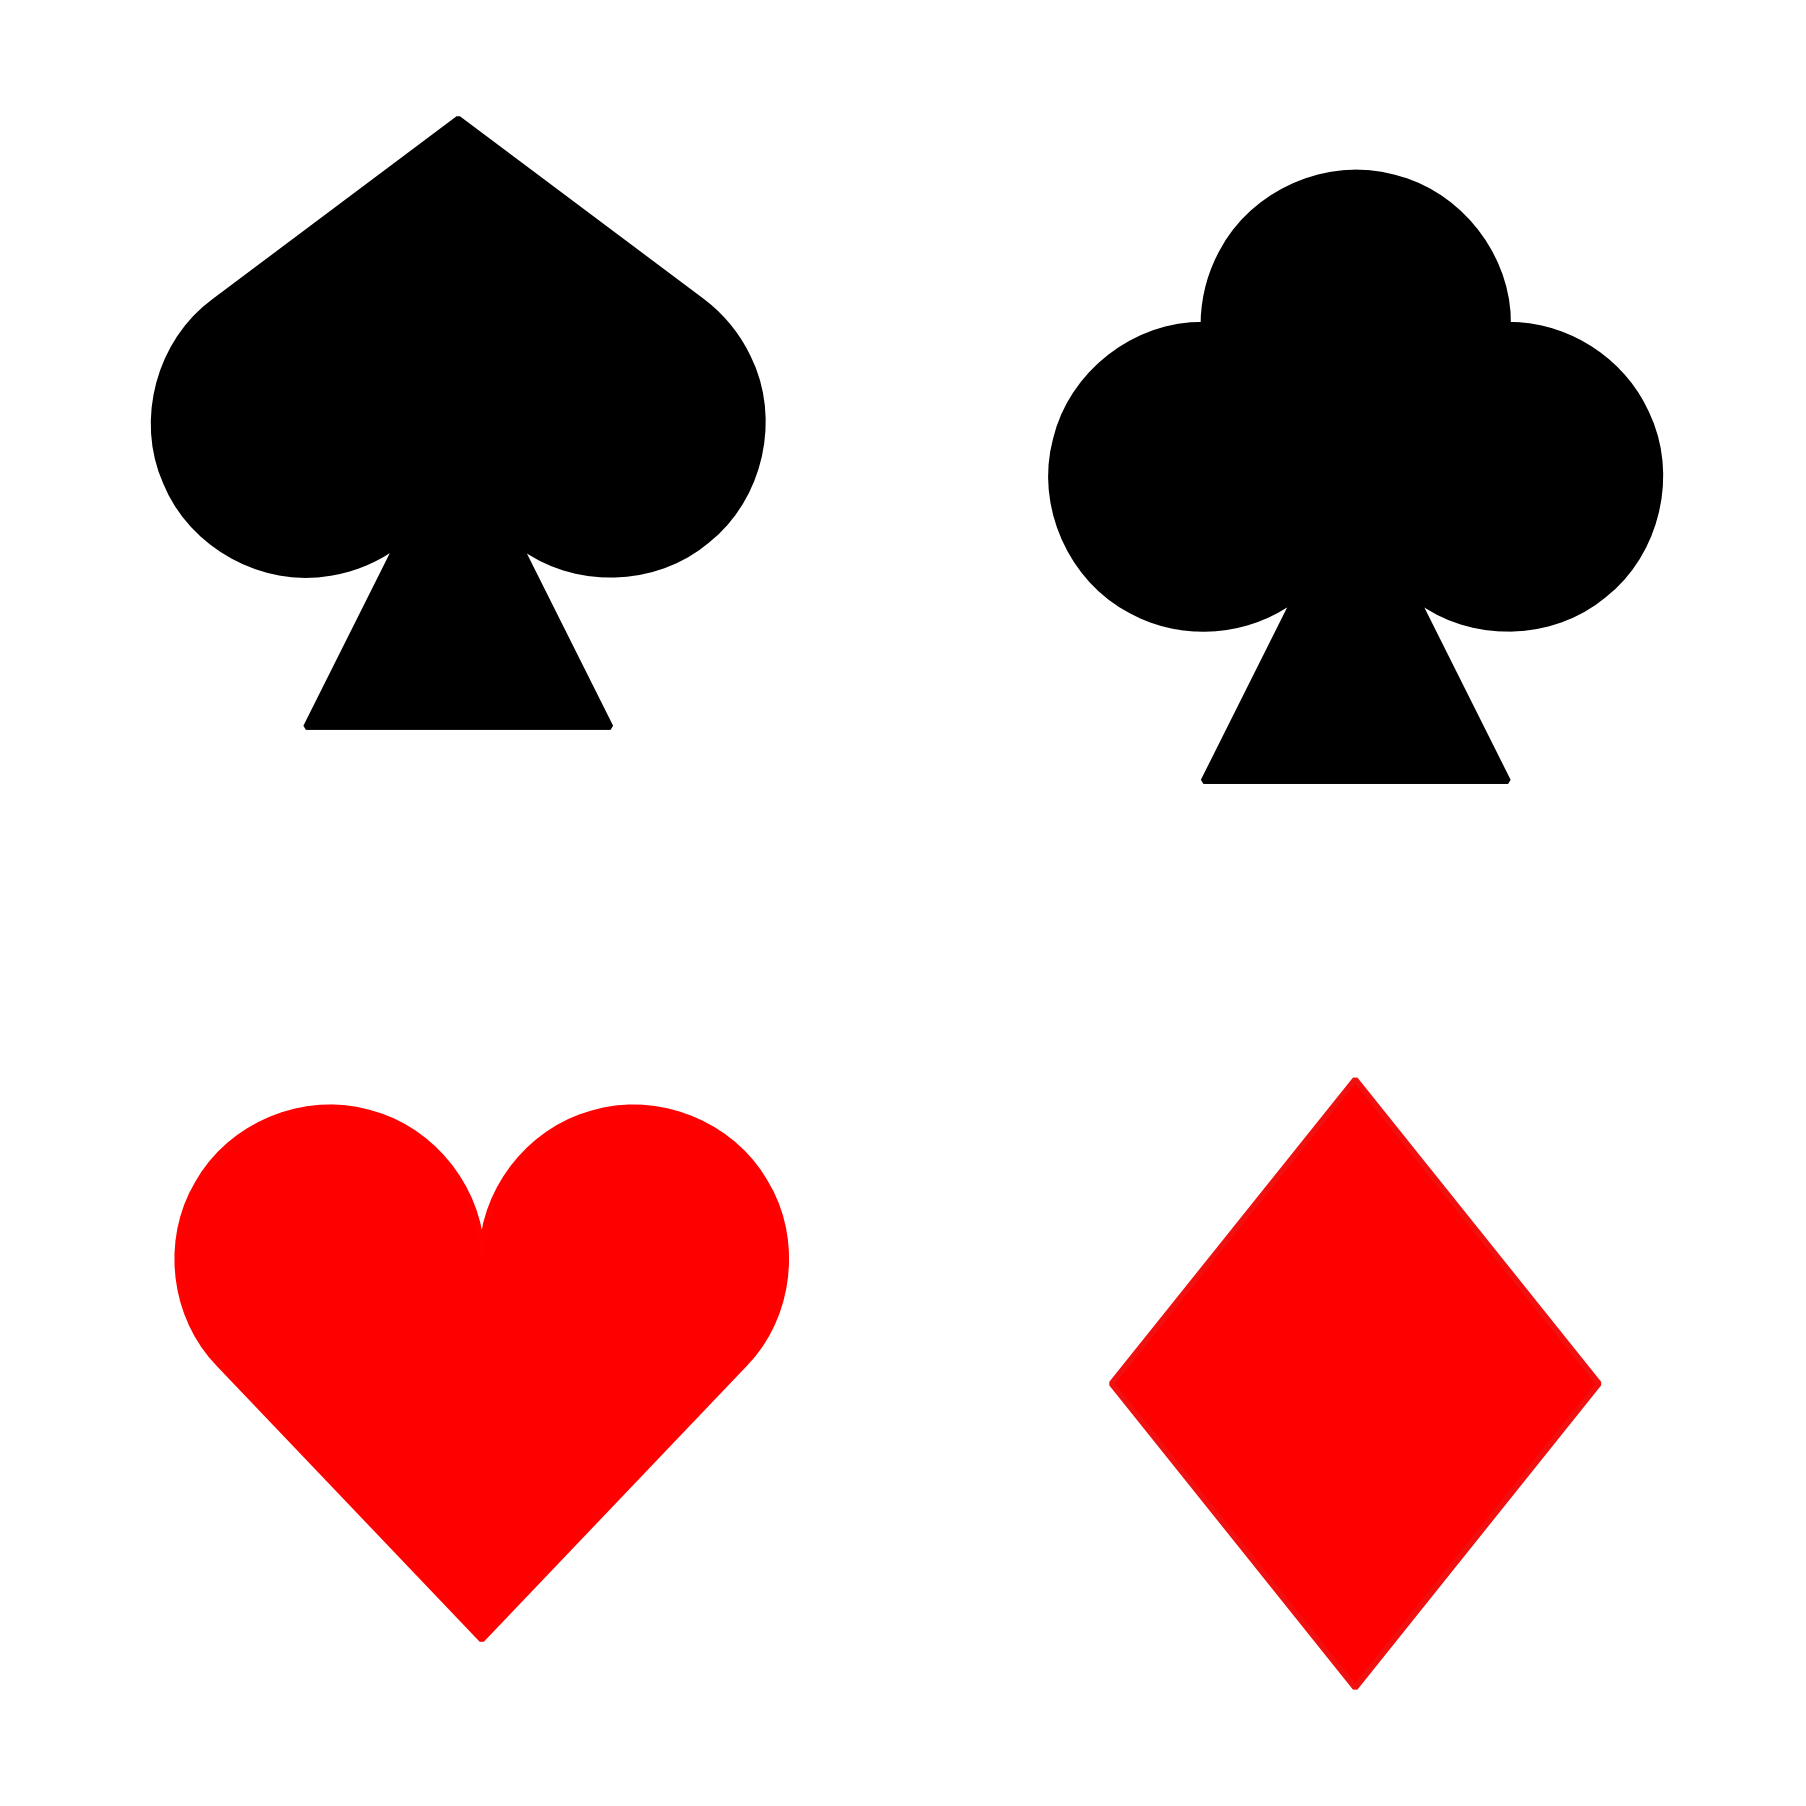 there-are-three-playing-cards-in-a-row-there-is-a-two-to-the-right-of-a